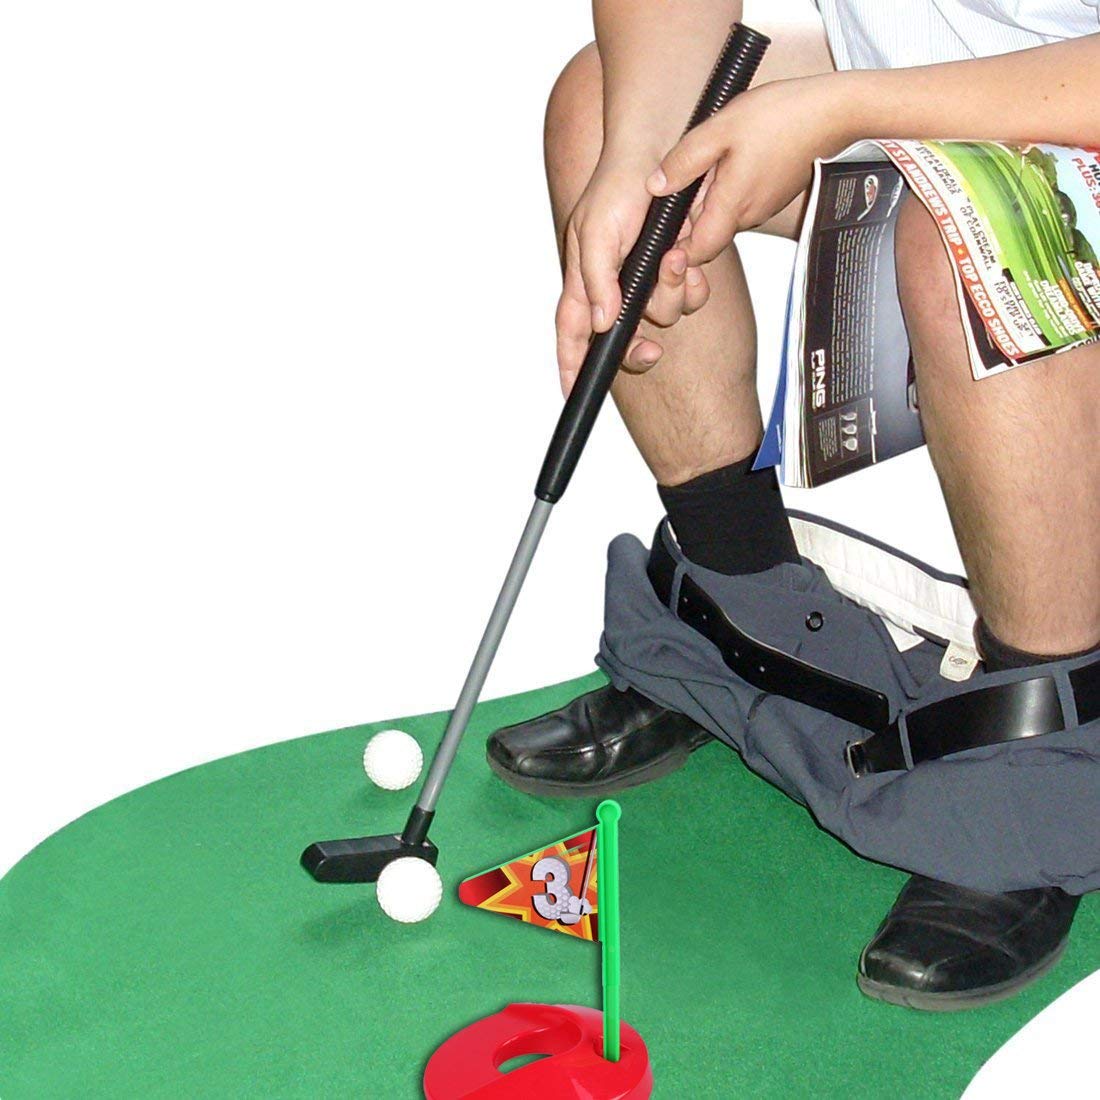 Give your phone a break and play a game of toilet golf! Get it for <a href="https://amzn.to/2S5NAXm">$12.99</a>.